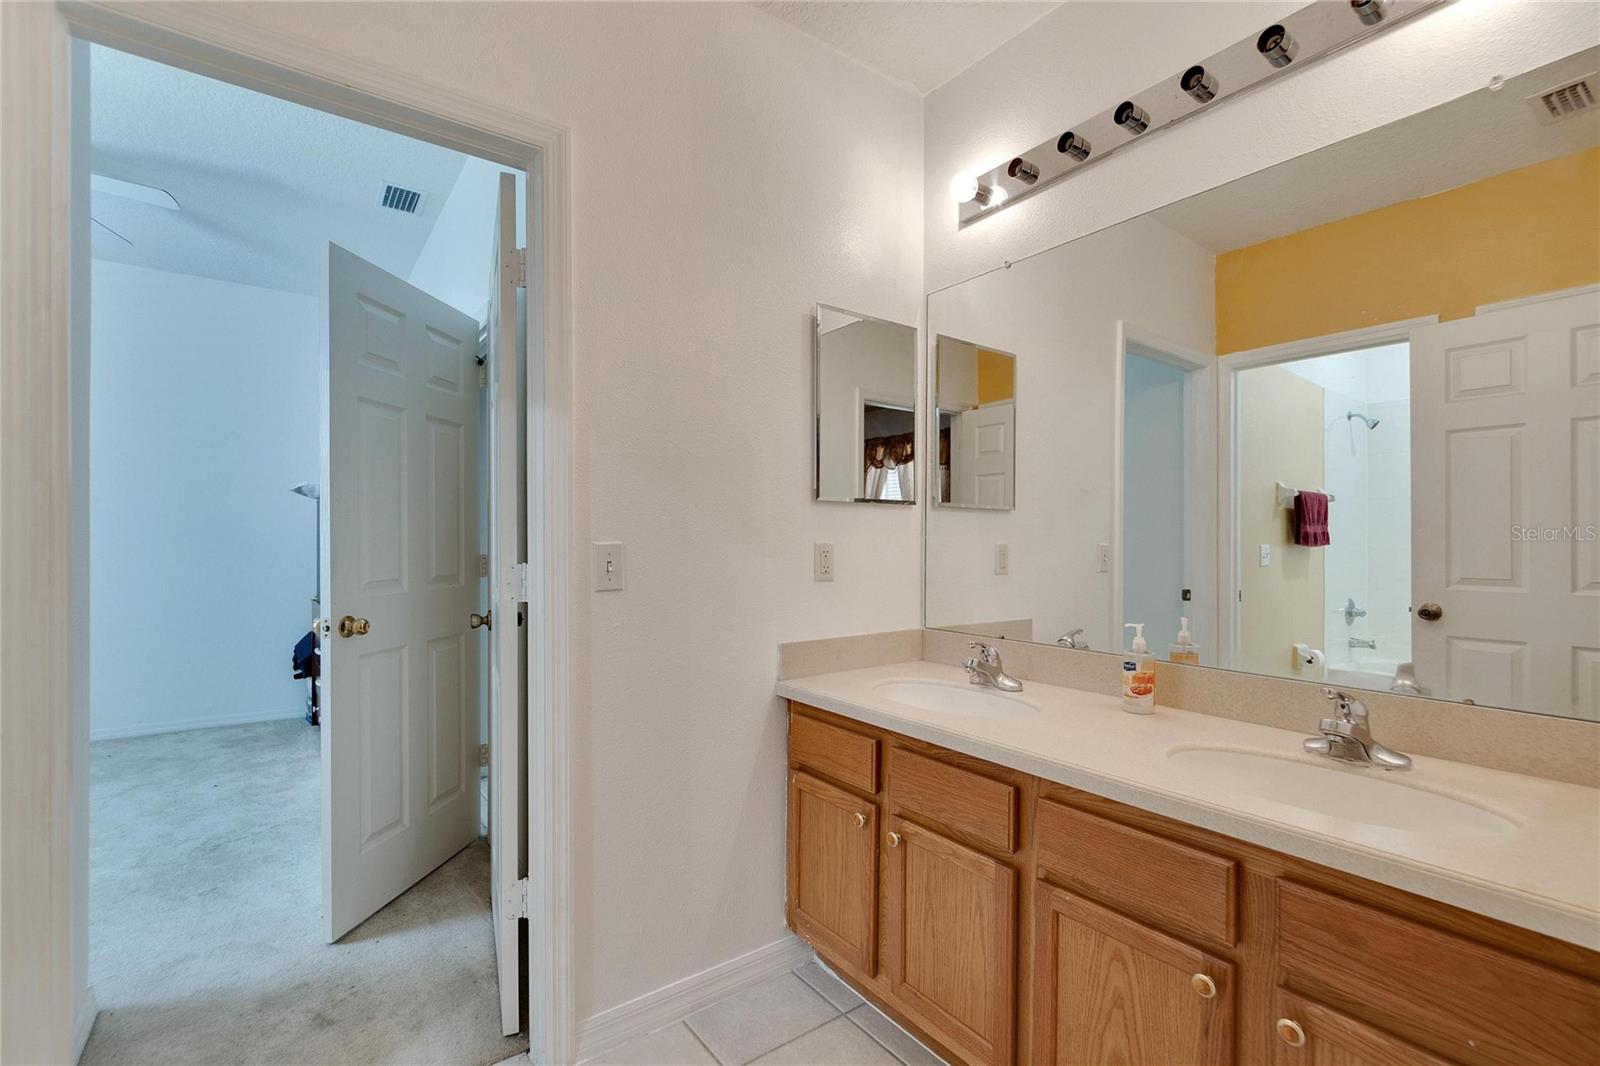 Jack and Jill Bathroom (2) with Double Vanity shared between (Secondary Bedrooms (2 & 3)